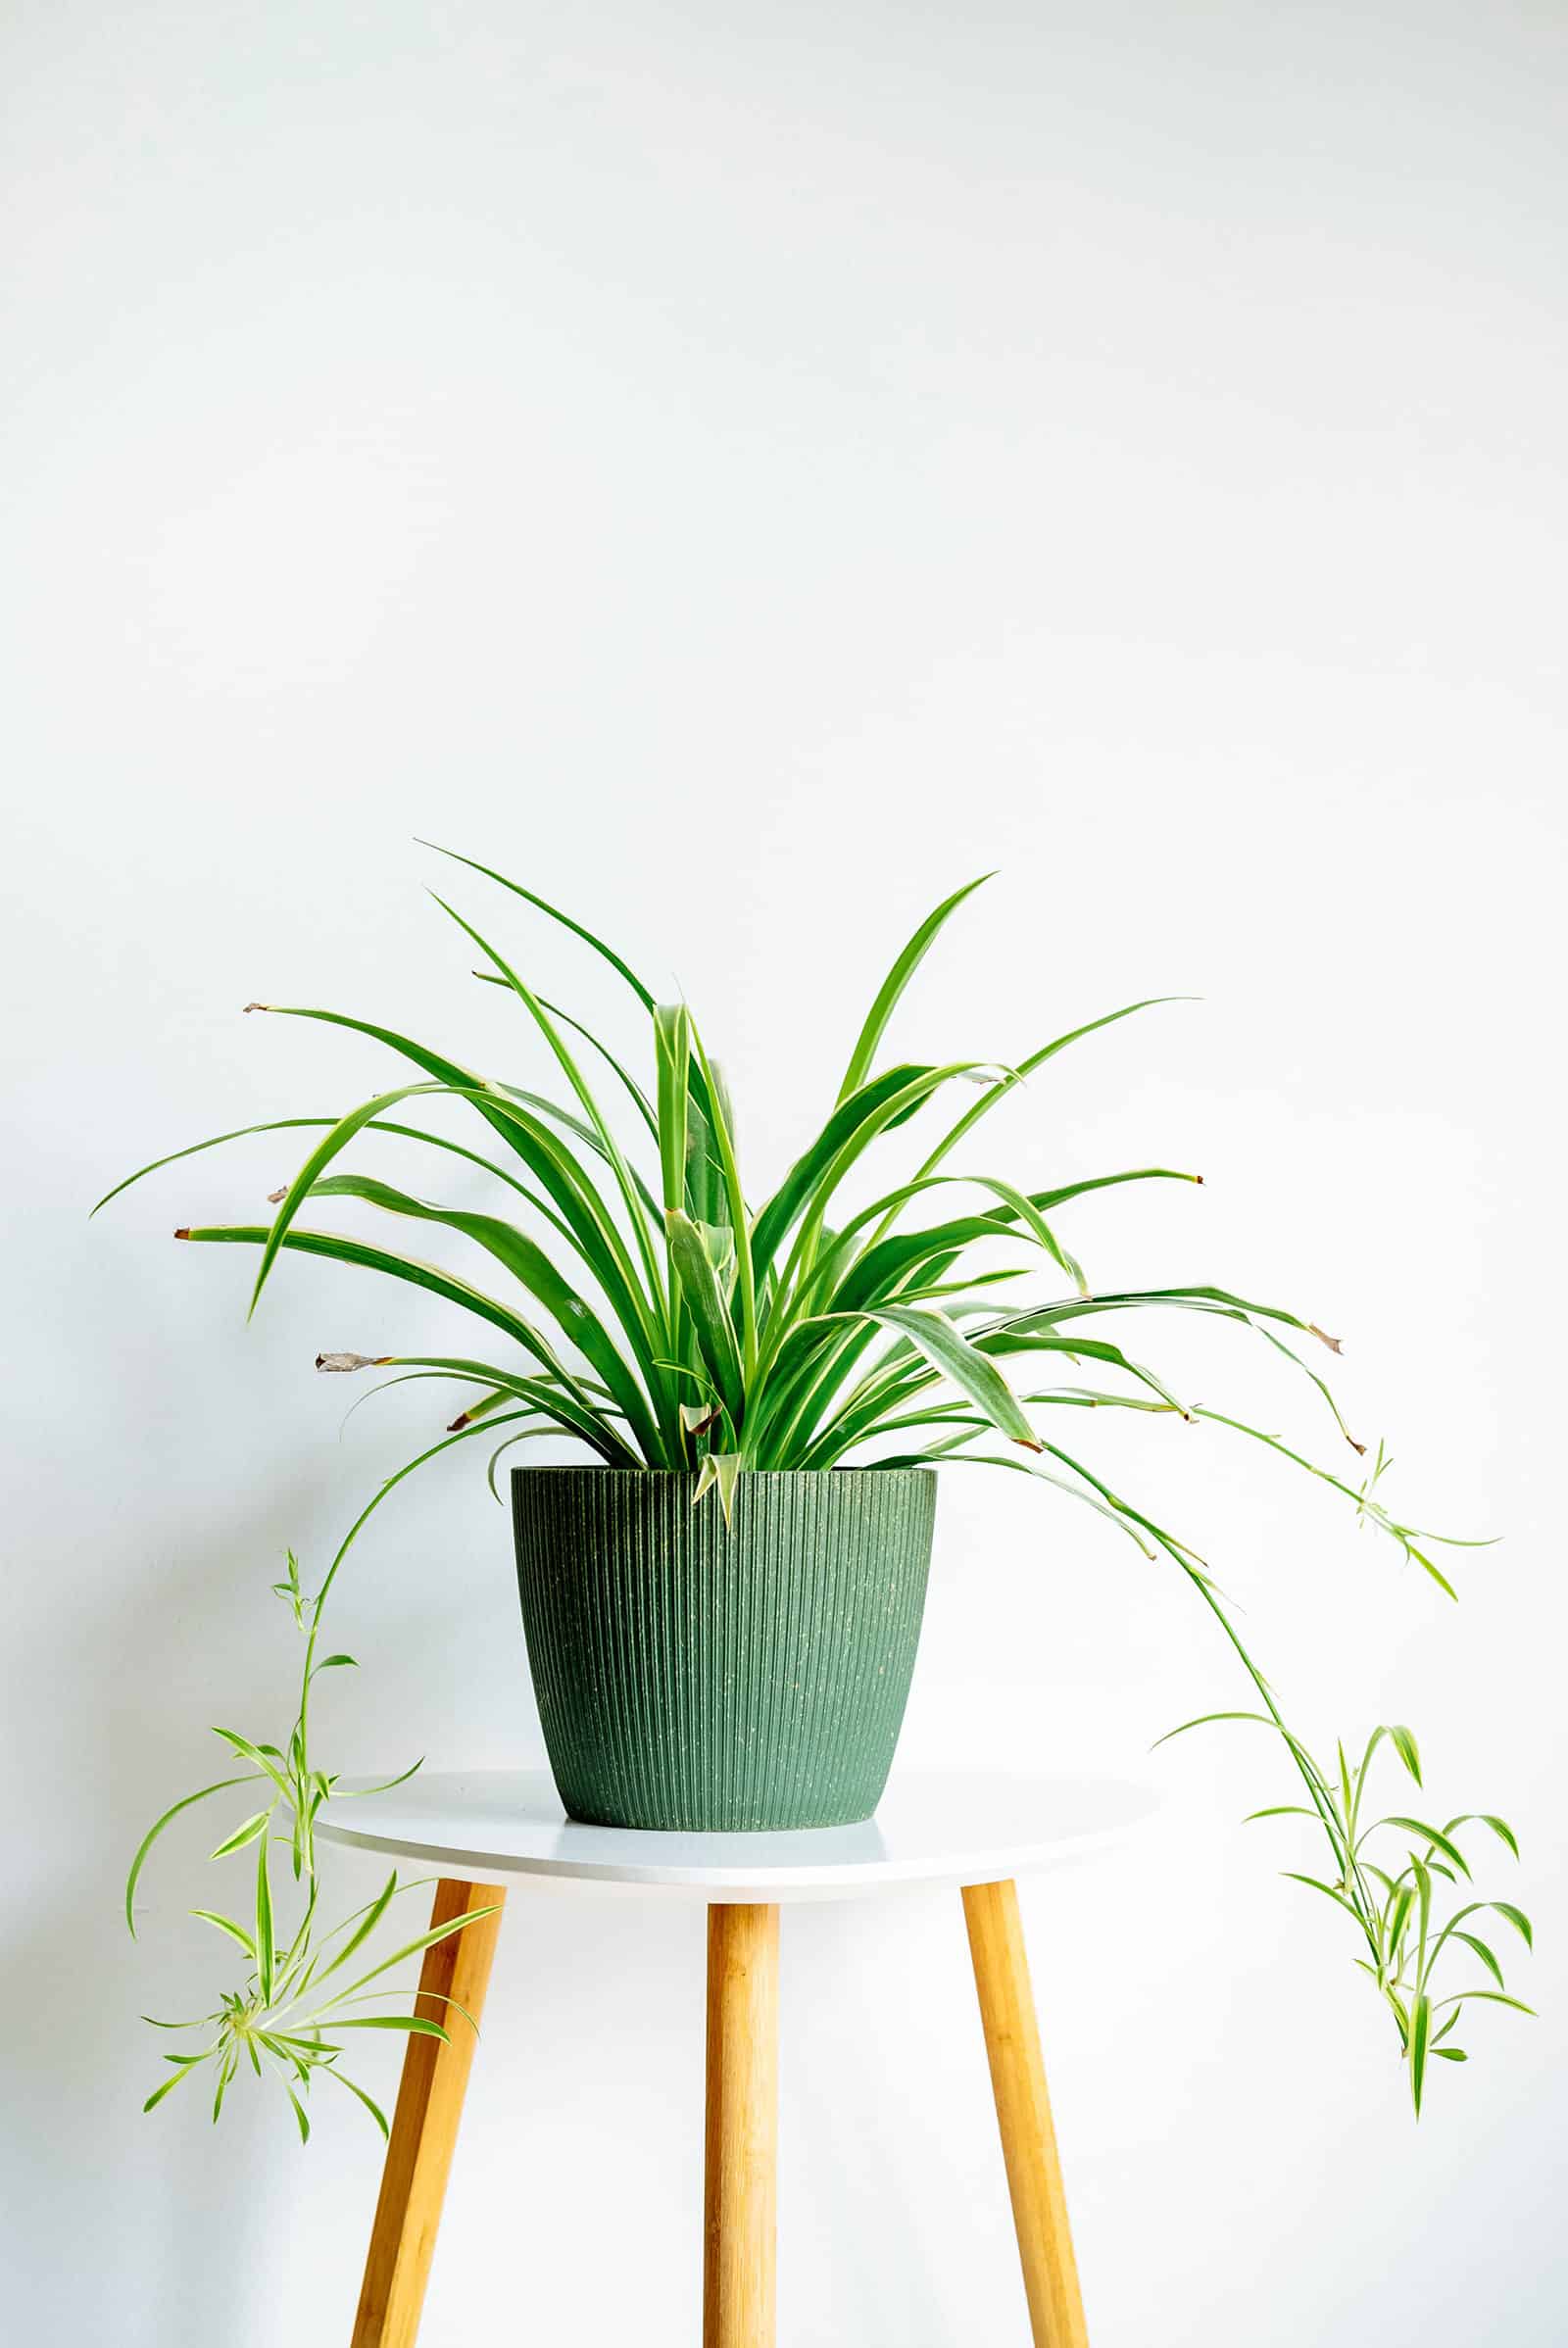 Spider plant in a green ceramic planter on a three-legged white stool, shot against a white background